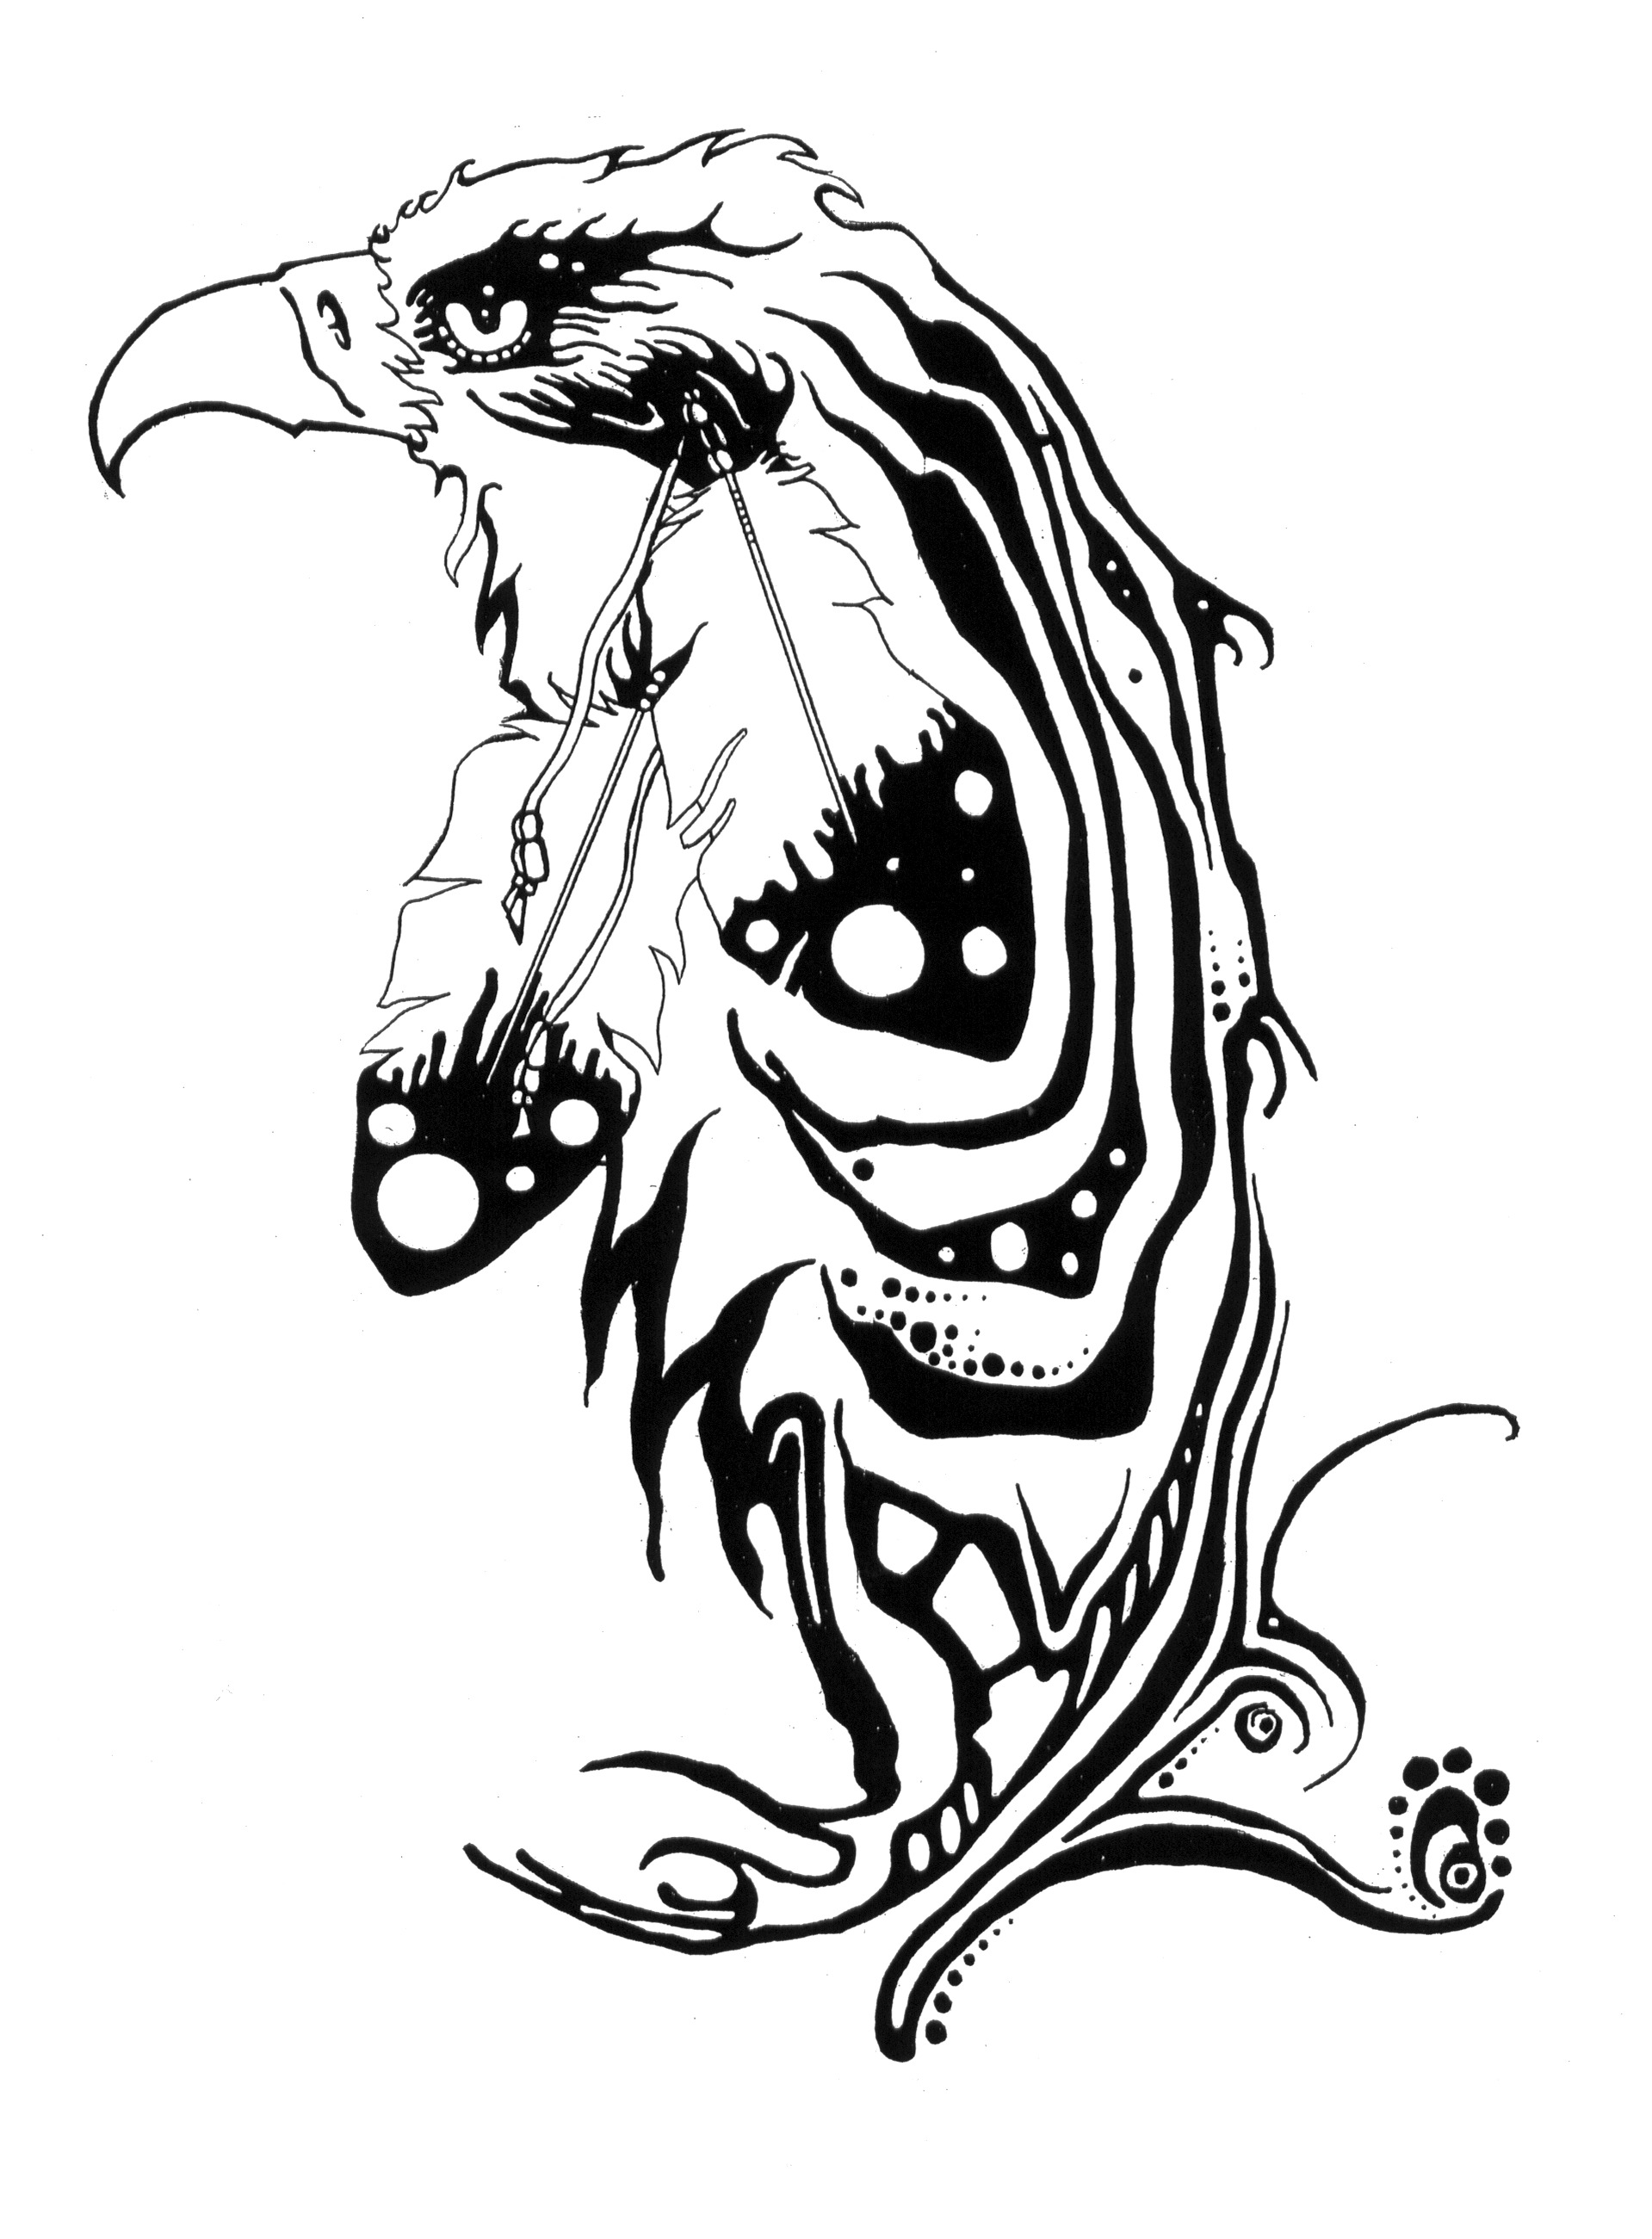 Uncolored ornamented eagle with feather decoration tattoo design